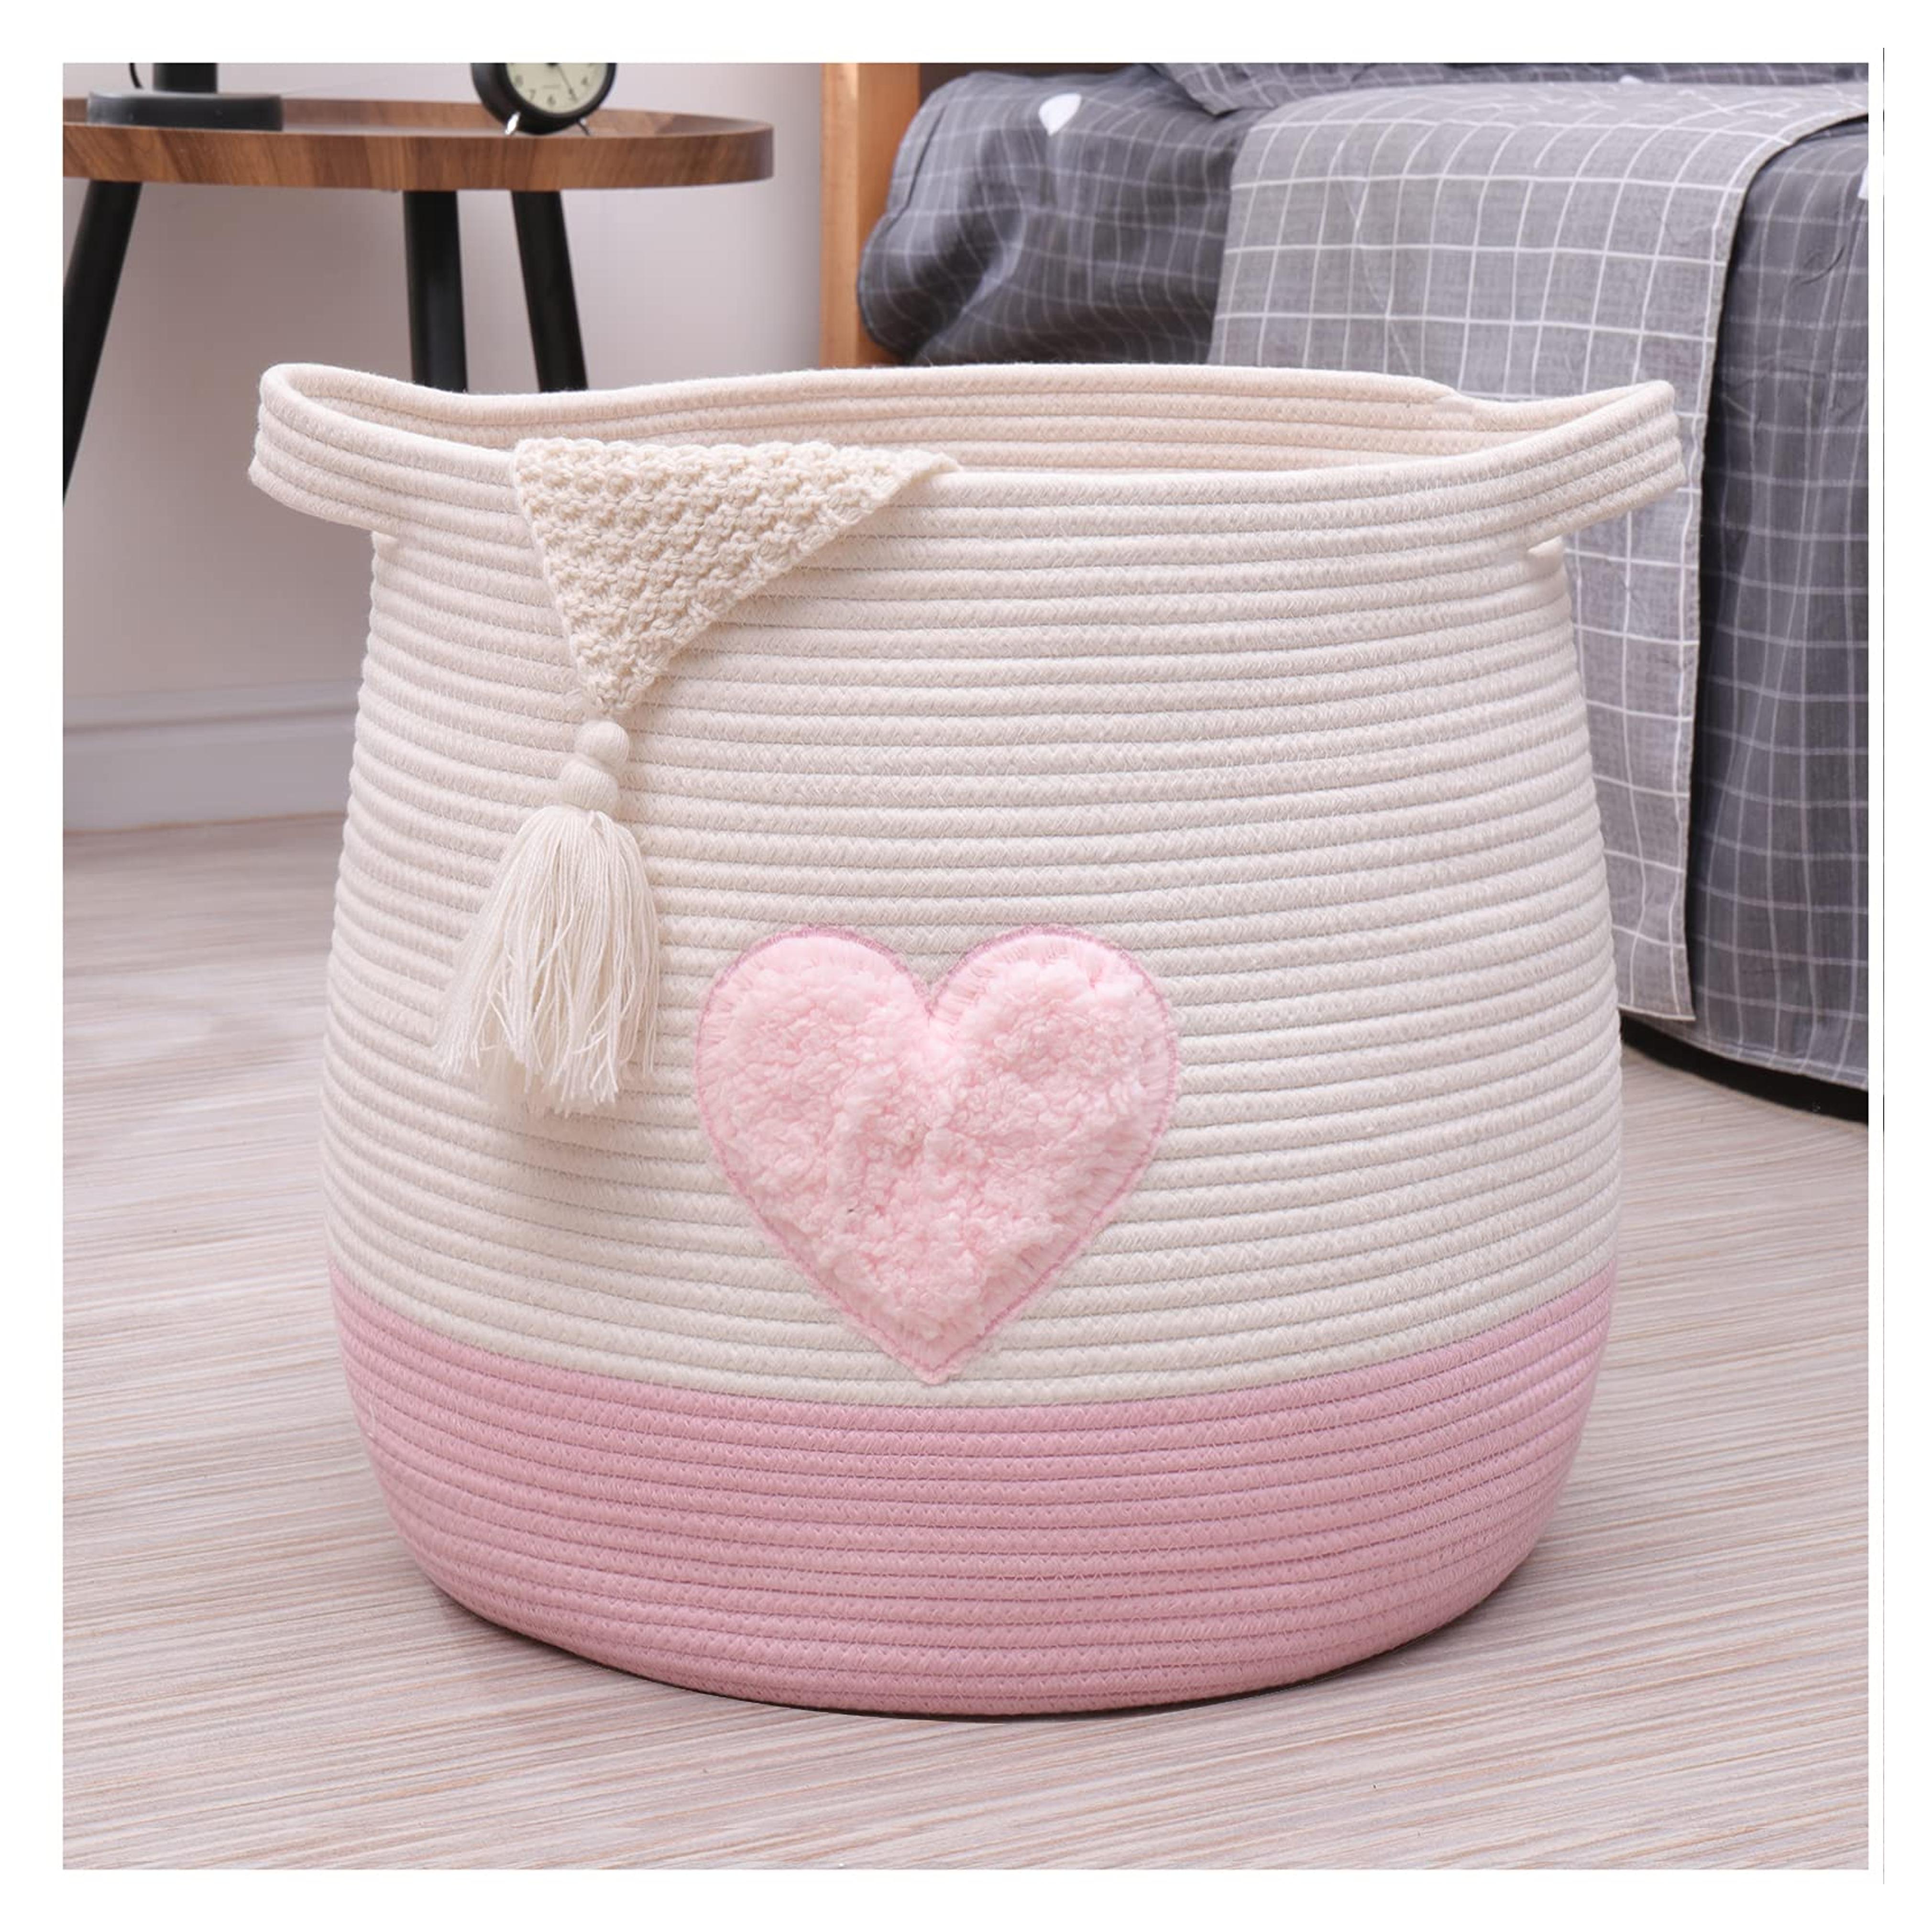 childishness ndup Large Cotton Rope Basket, Woven Storage Basket for Toy, Laundry and Blanket Organizer Basket, Round Hamper Basket with Handles for Kid's Room 17.7"x16.9" (Pink Heart)